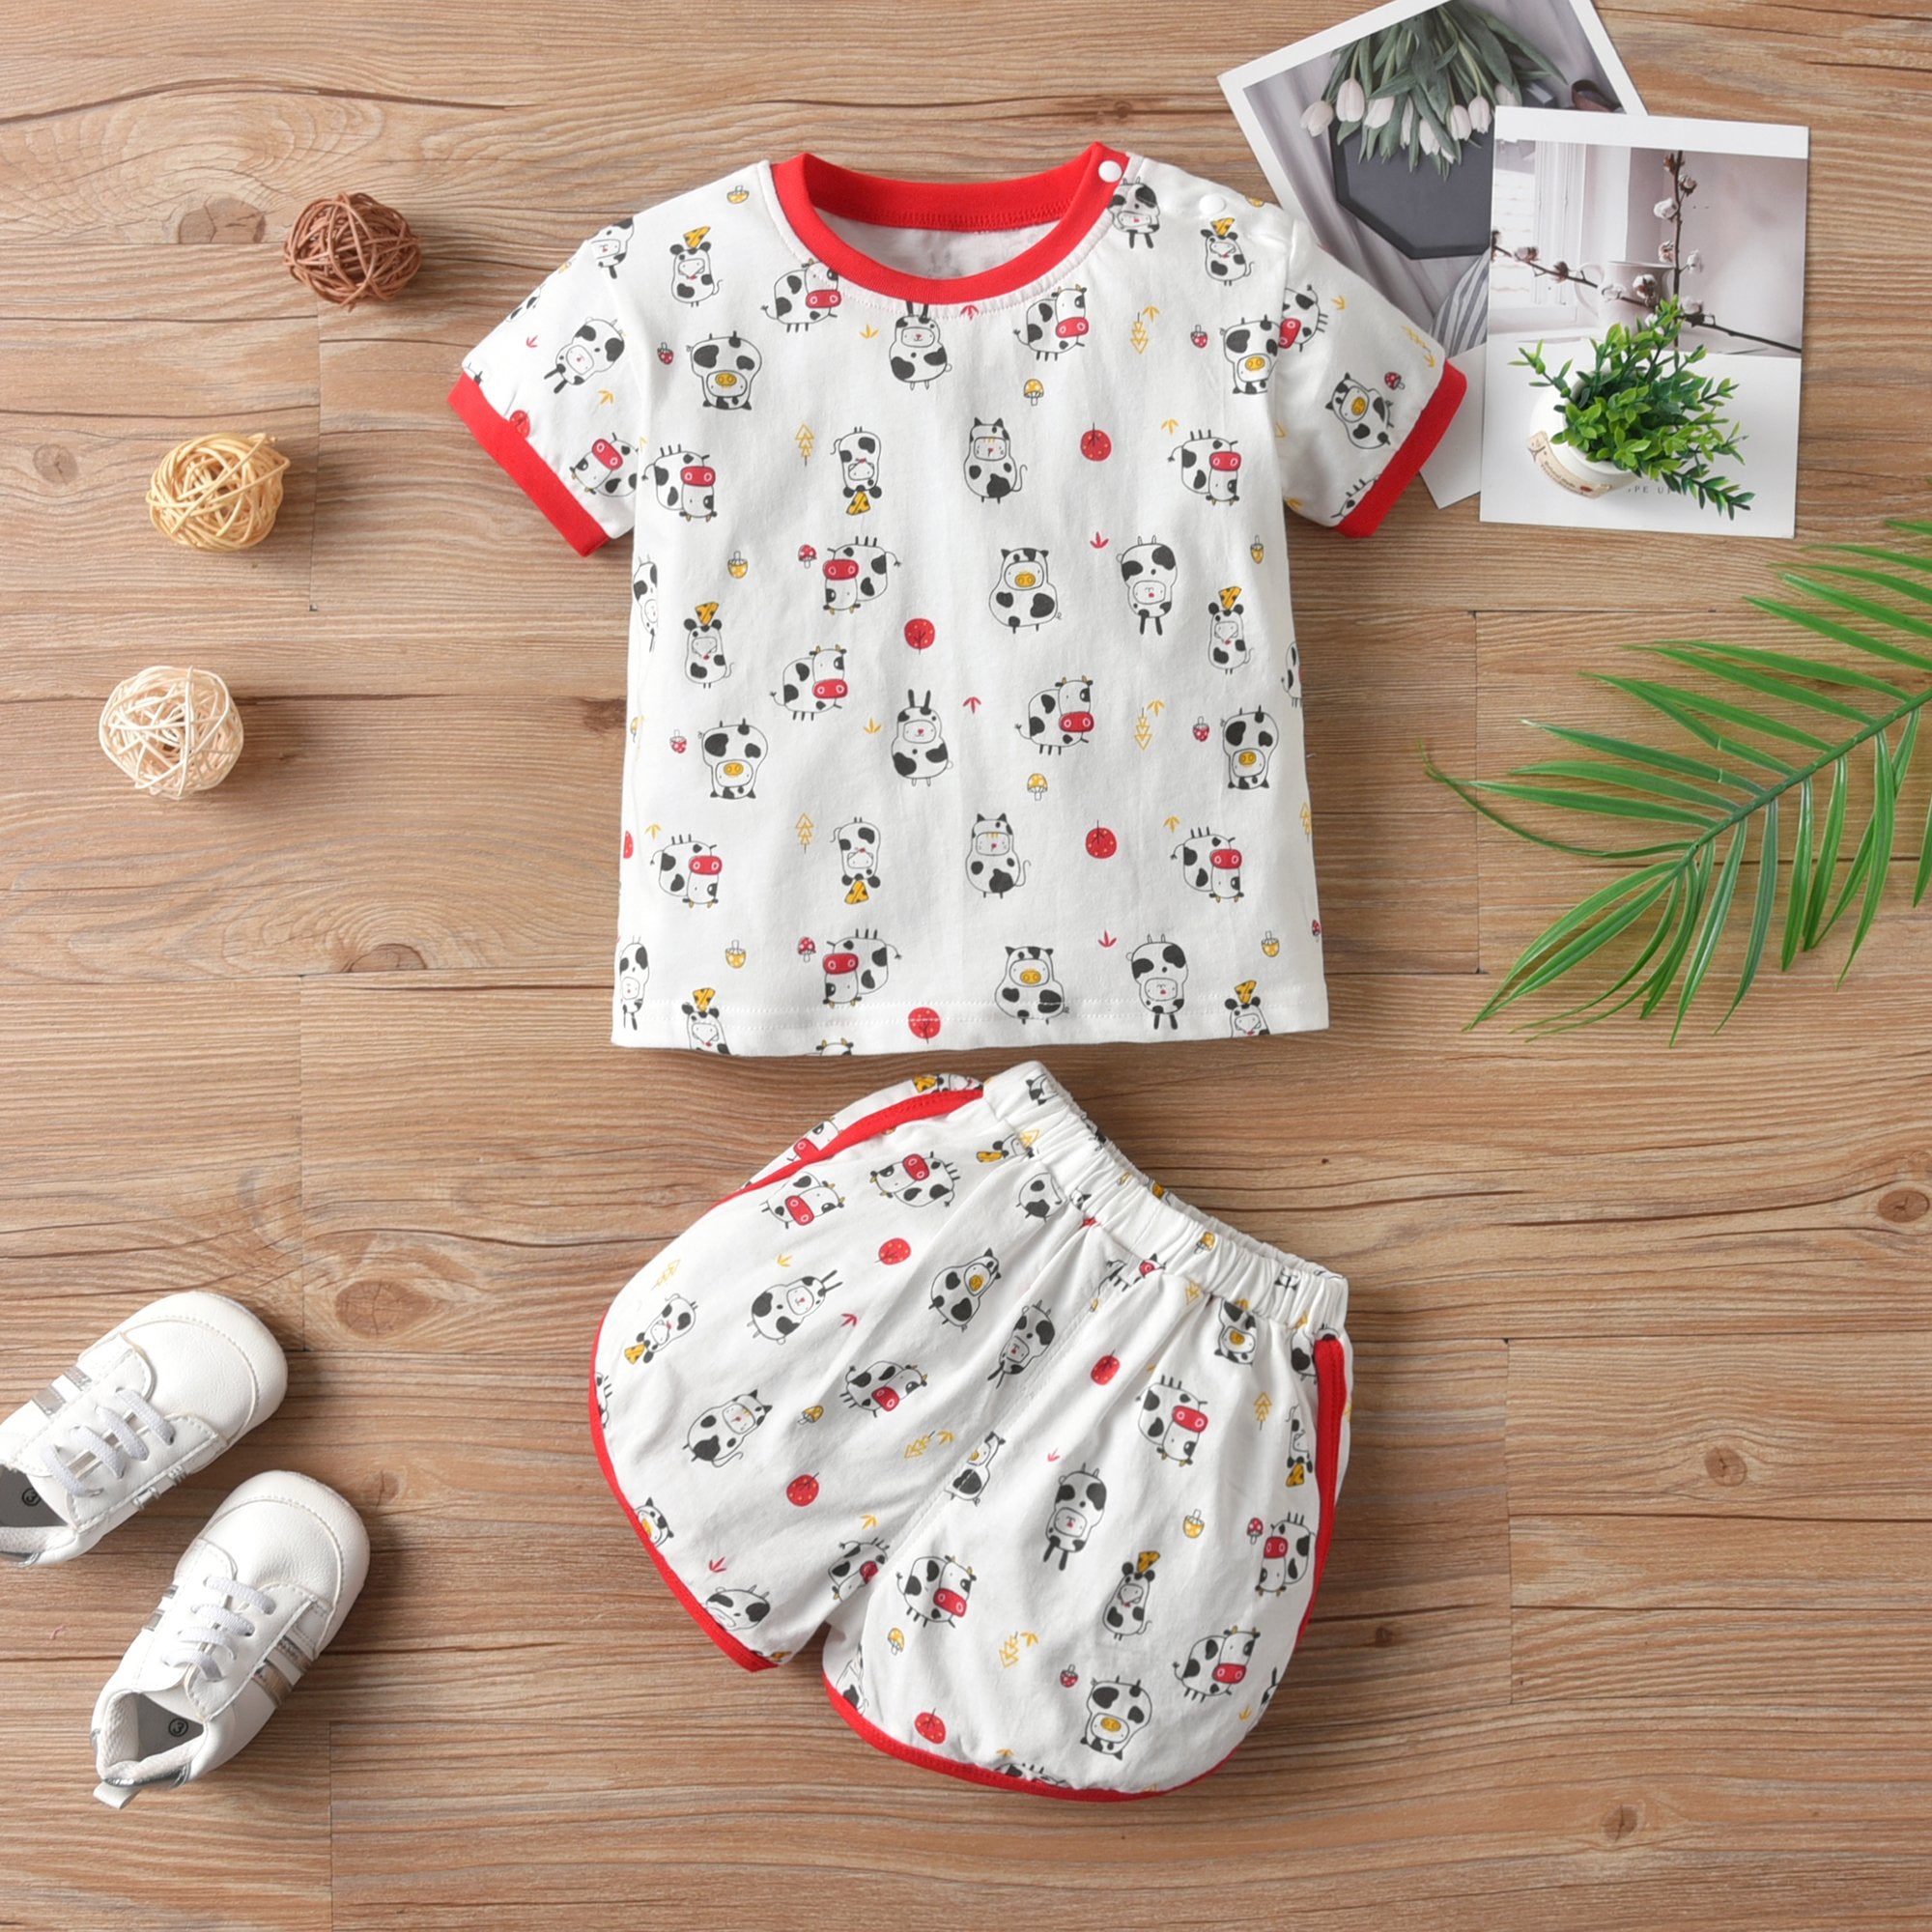 Baby Cartoon Cute Animal Print Casual And Comfortable Short-Sleeved Suit Wholesale Kids Clothing